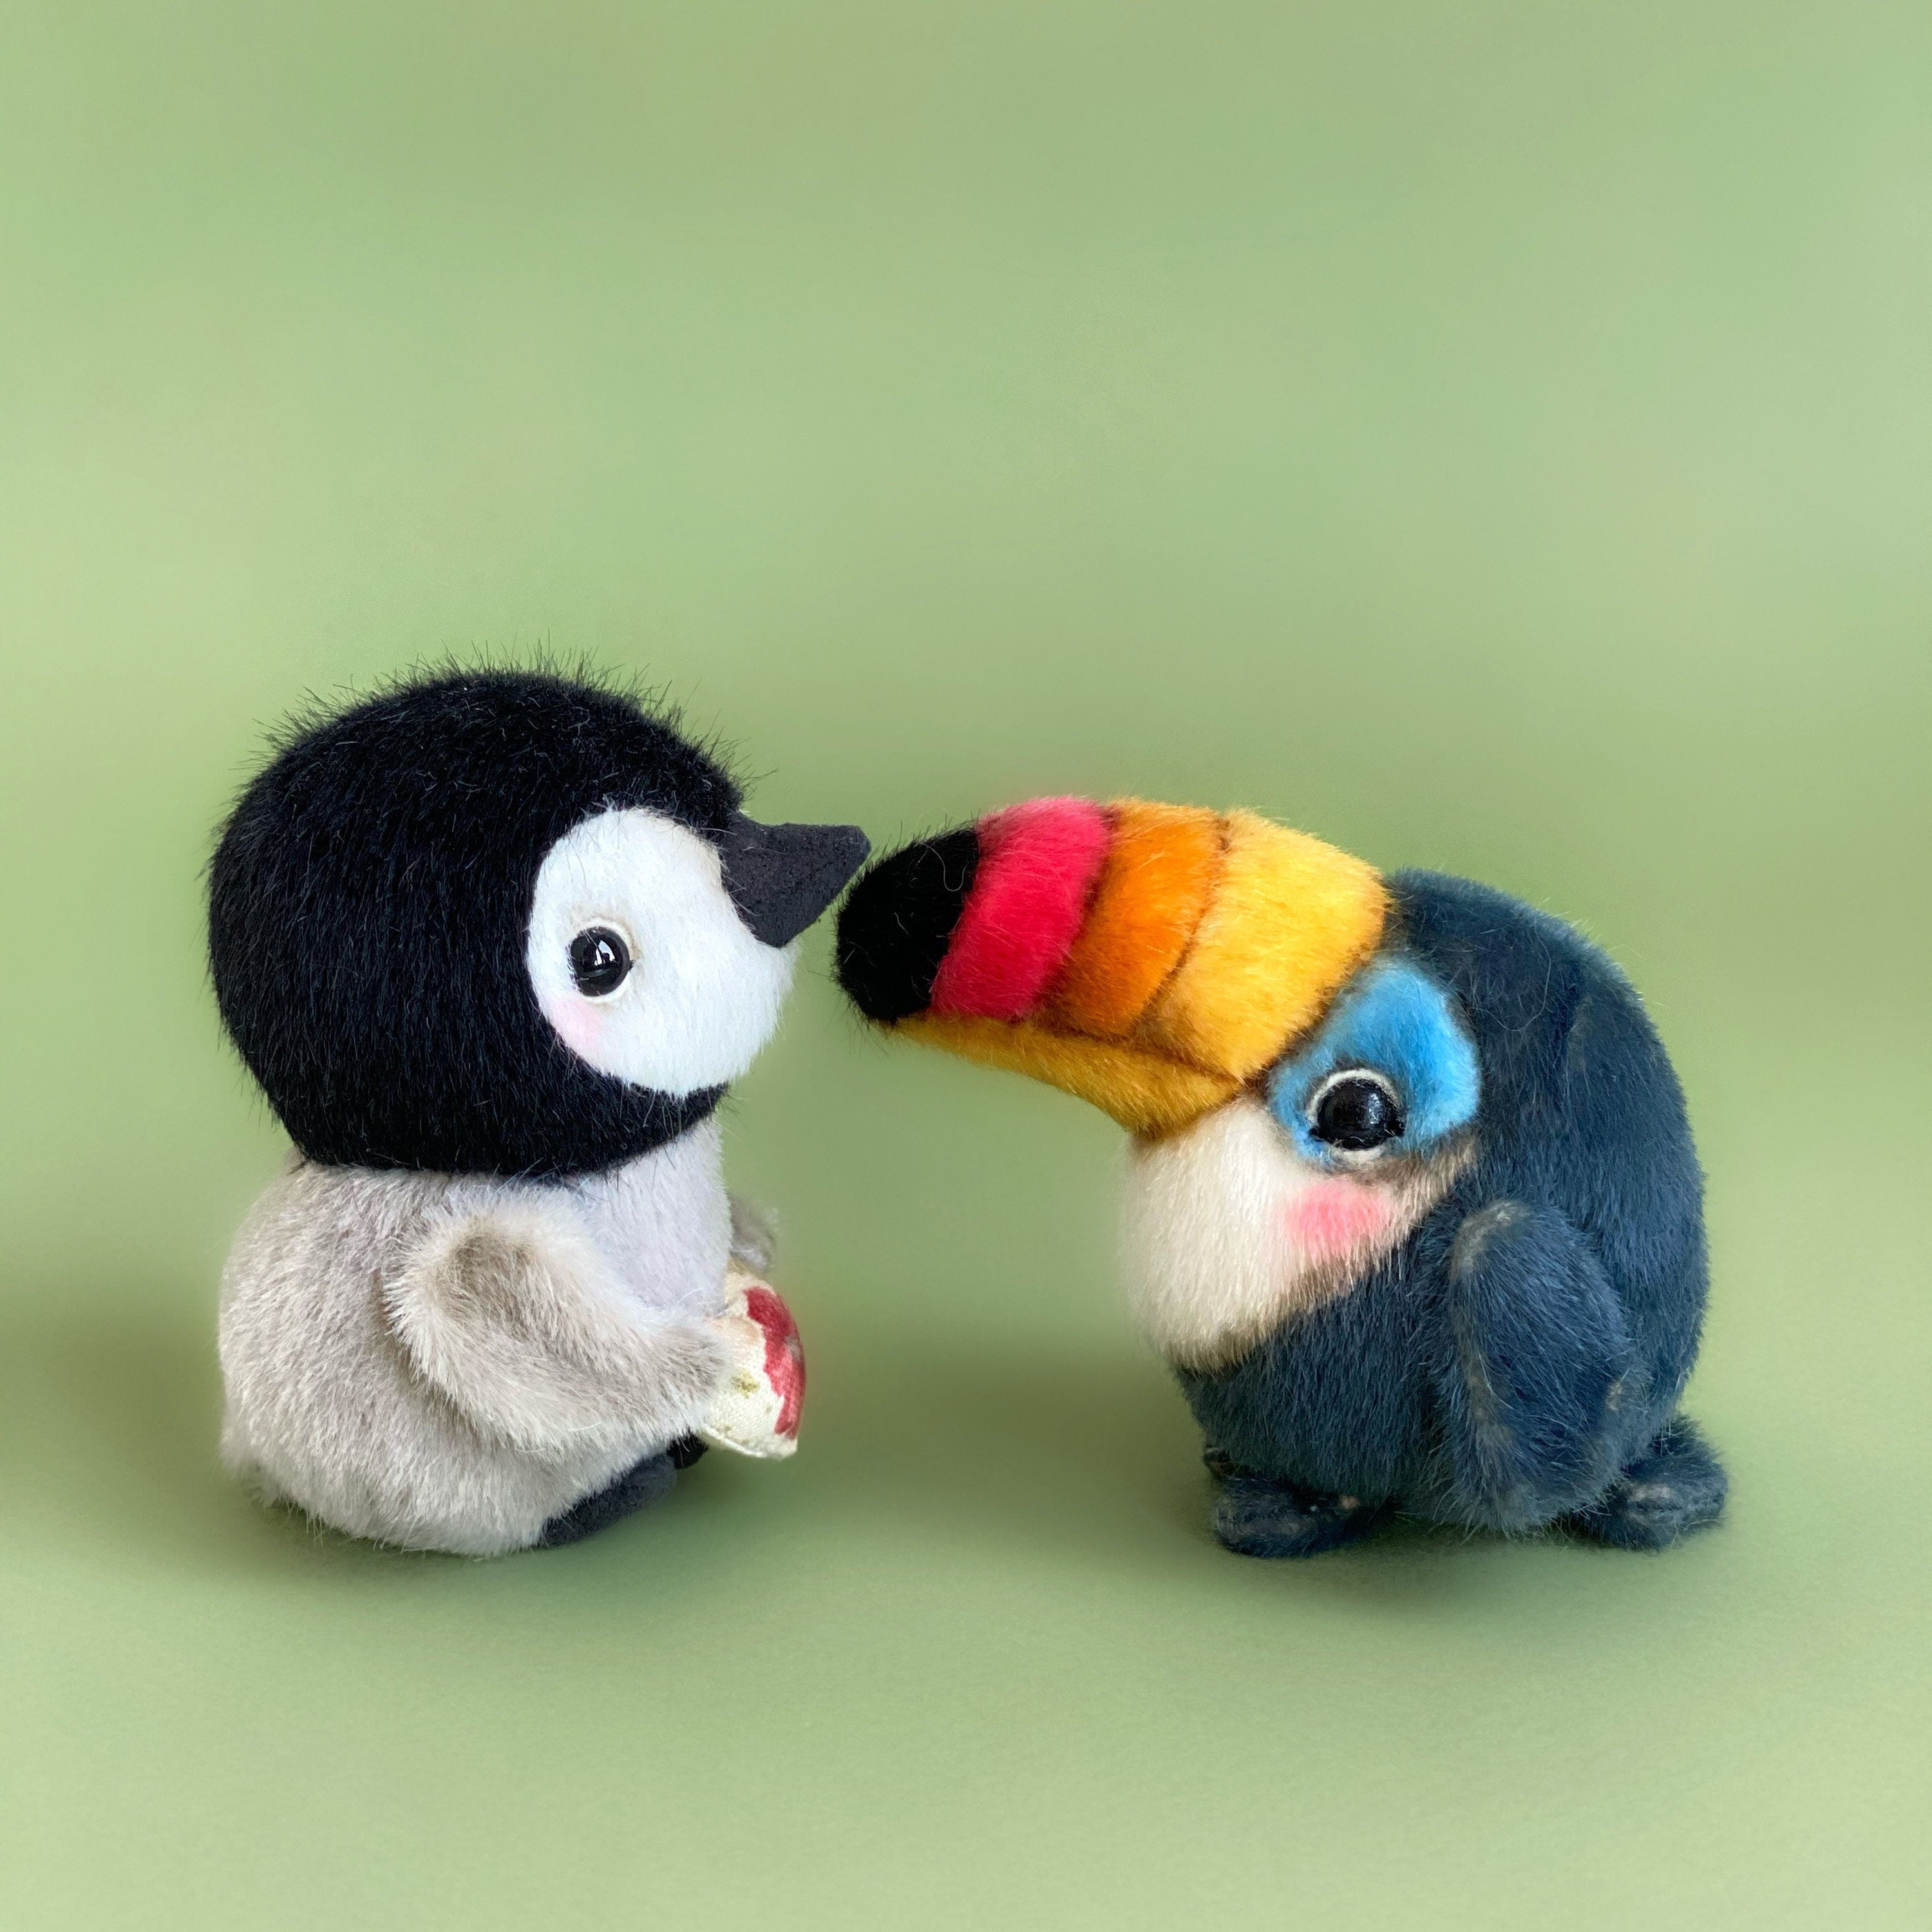 Toucan PDF sewing pattern Video tutorial DIY stuffed toy pattern DIY bird toy kids toy pattern easy to sew for adults TSminibears